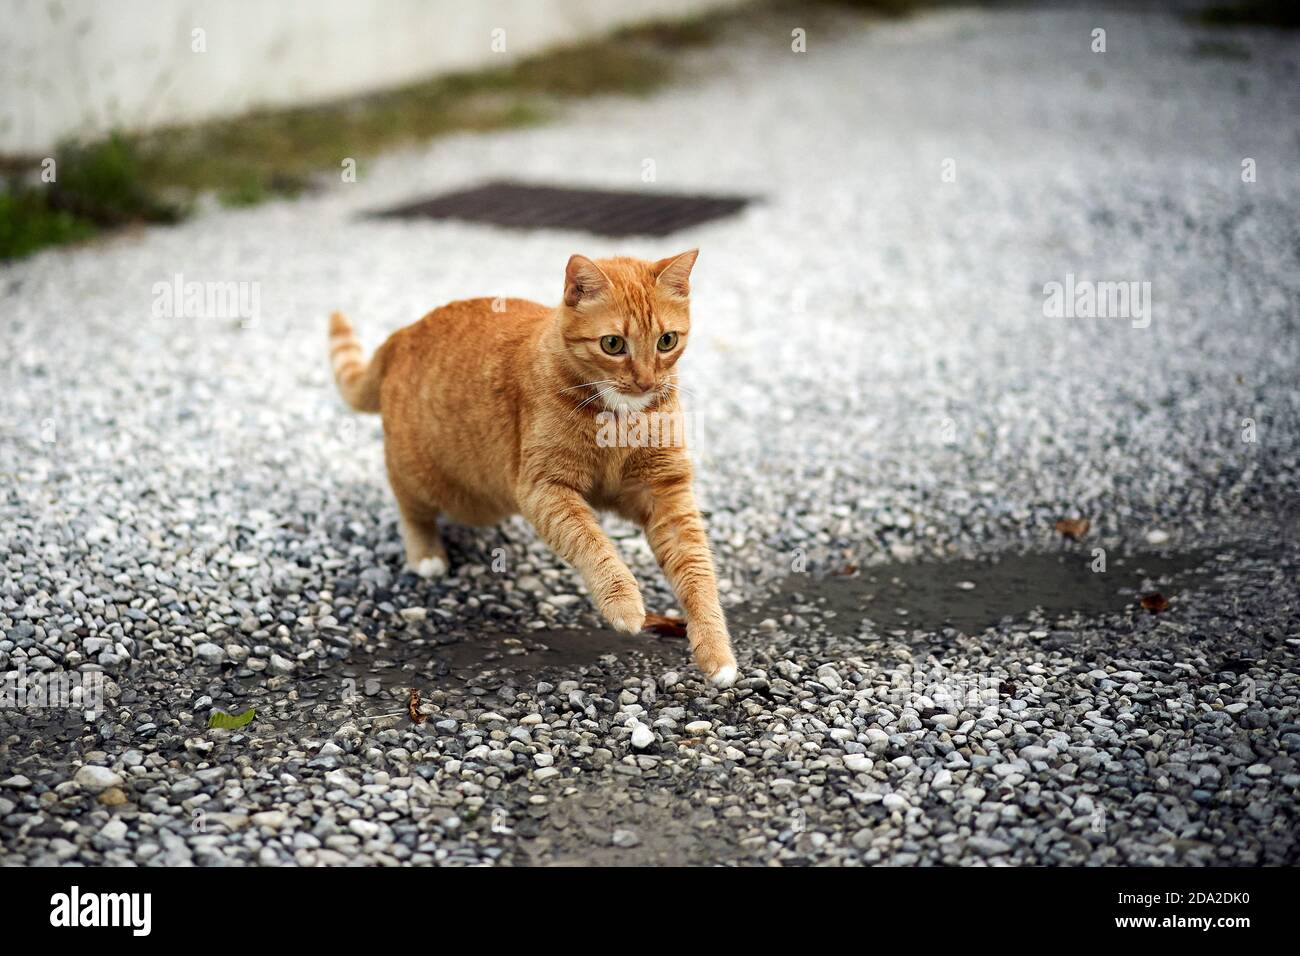 A cat jumping on a dirt road Stock Photo